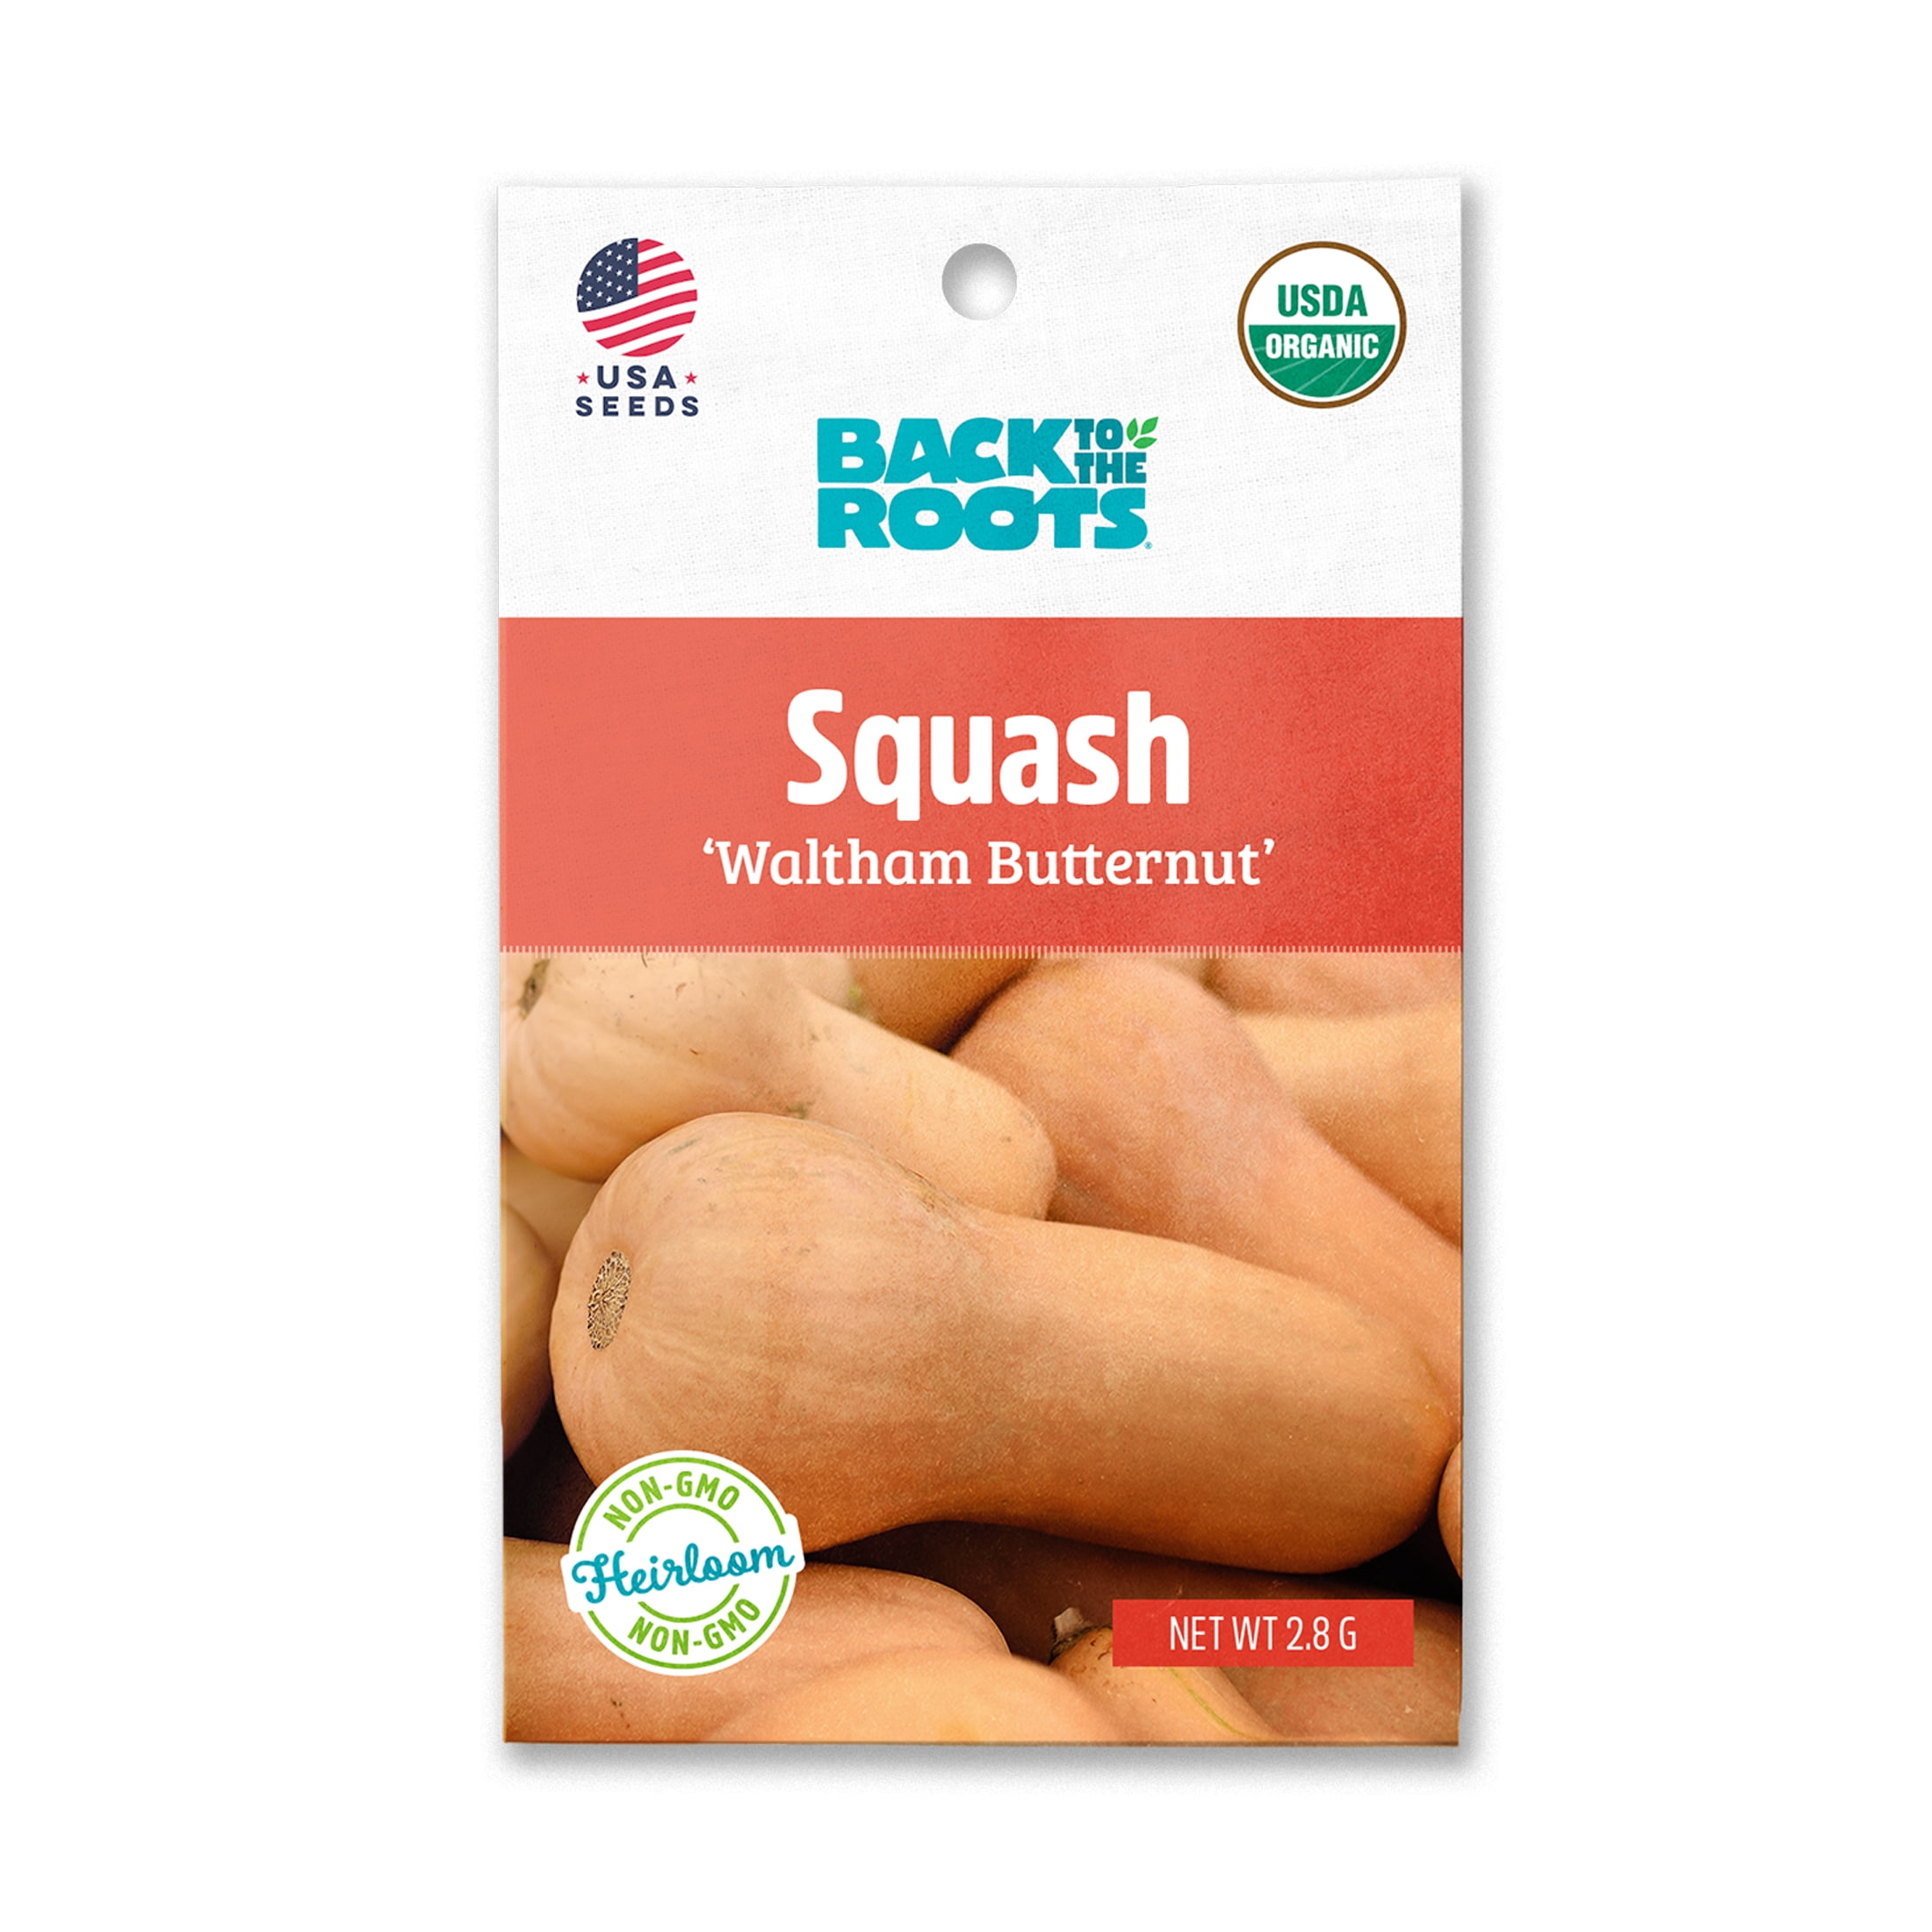 Back to the Roots Organic Waltham Butternut Squash Garden Seeds, 1 Seed Packet